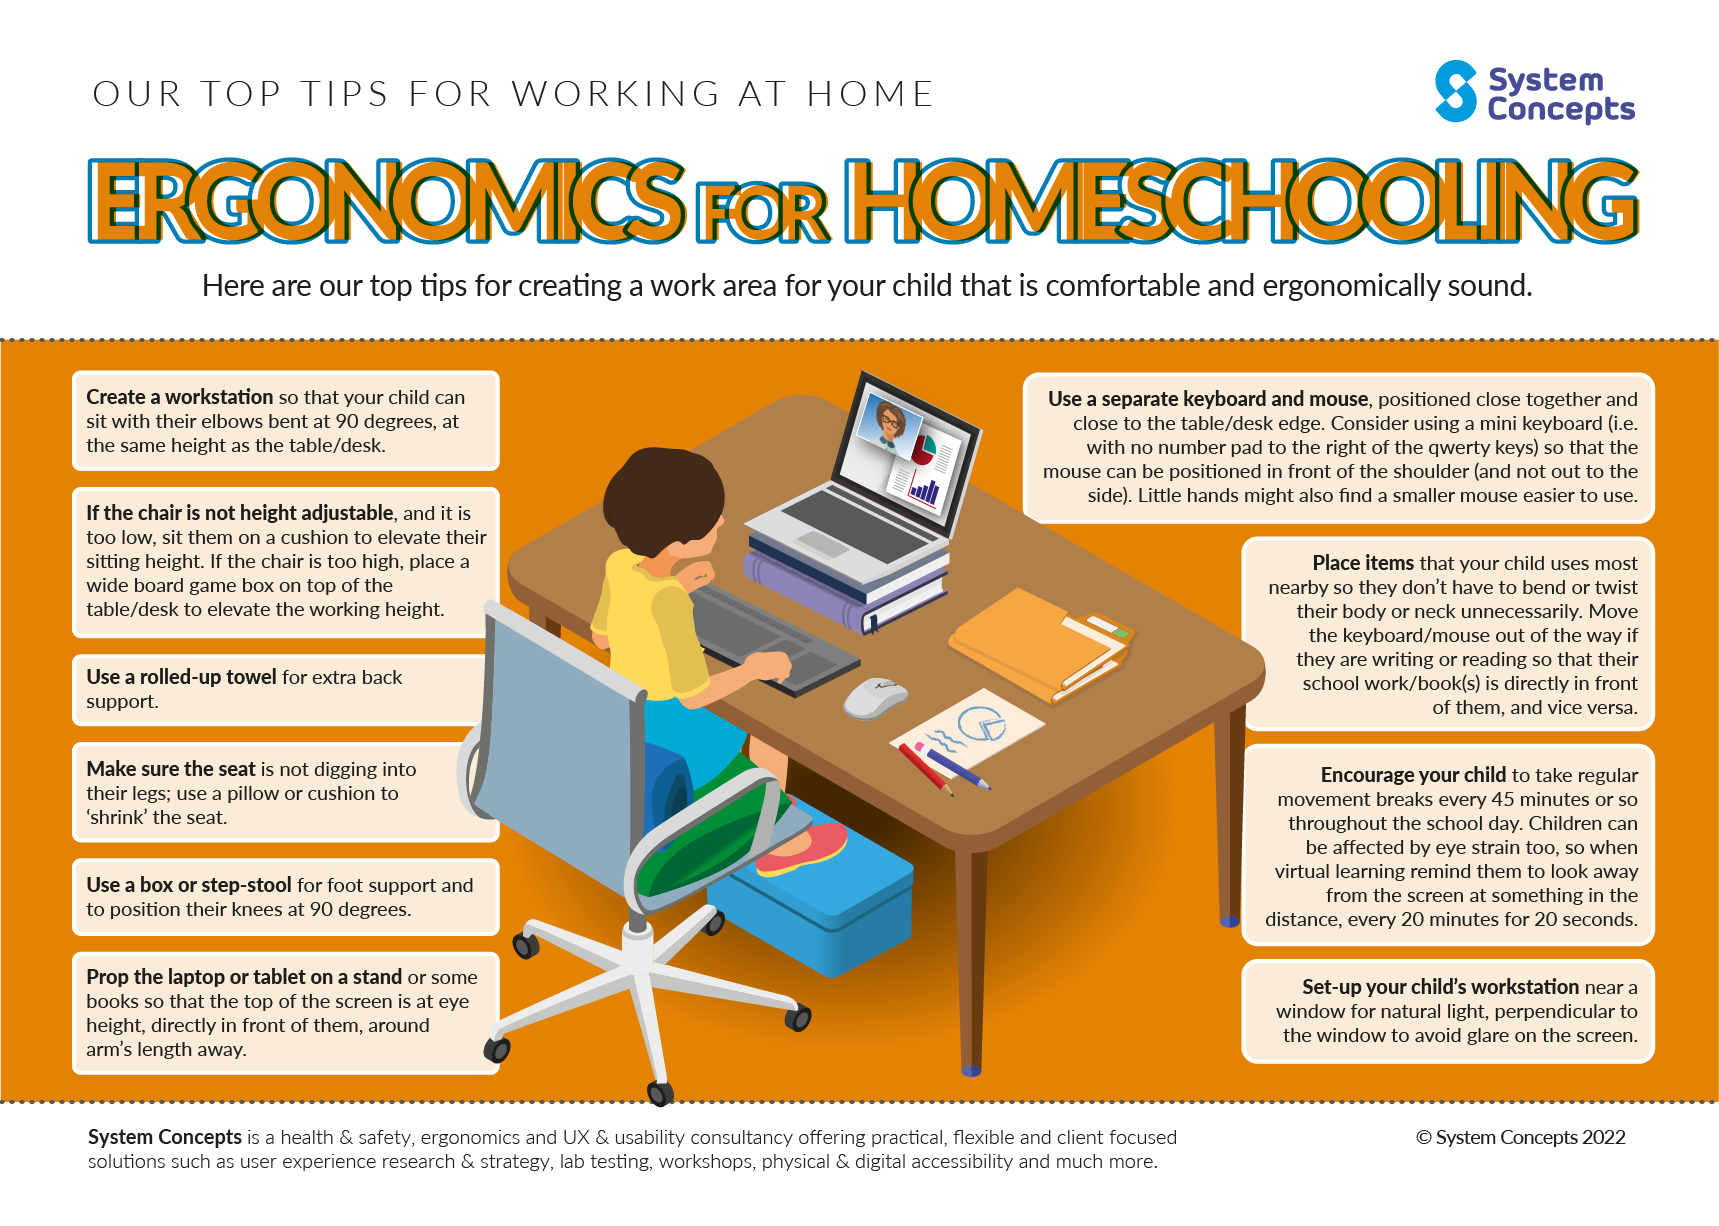 (alt="working from home infographic, our top ergonomic tips for home schooling")